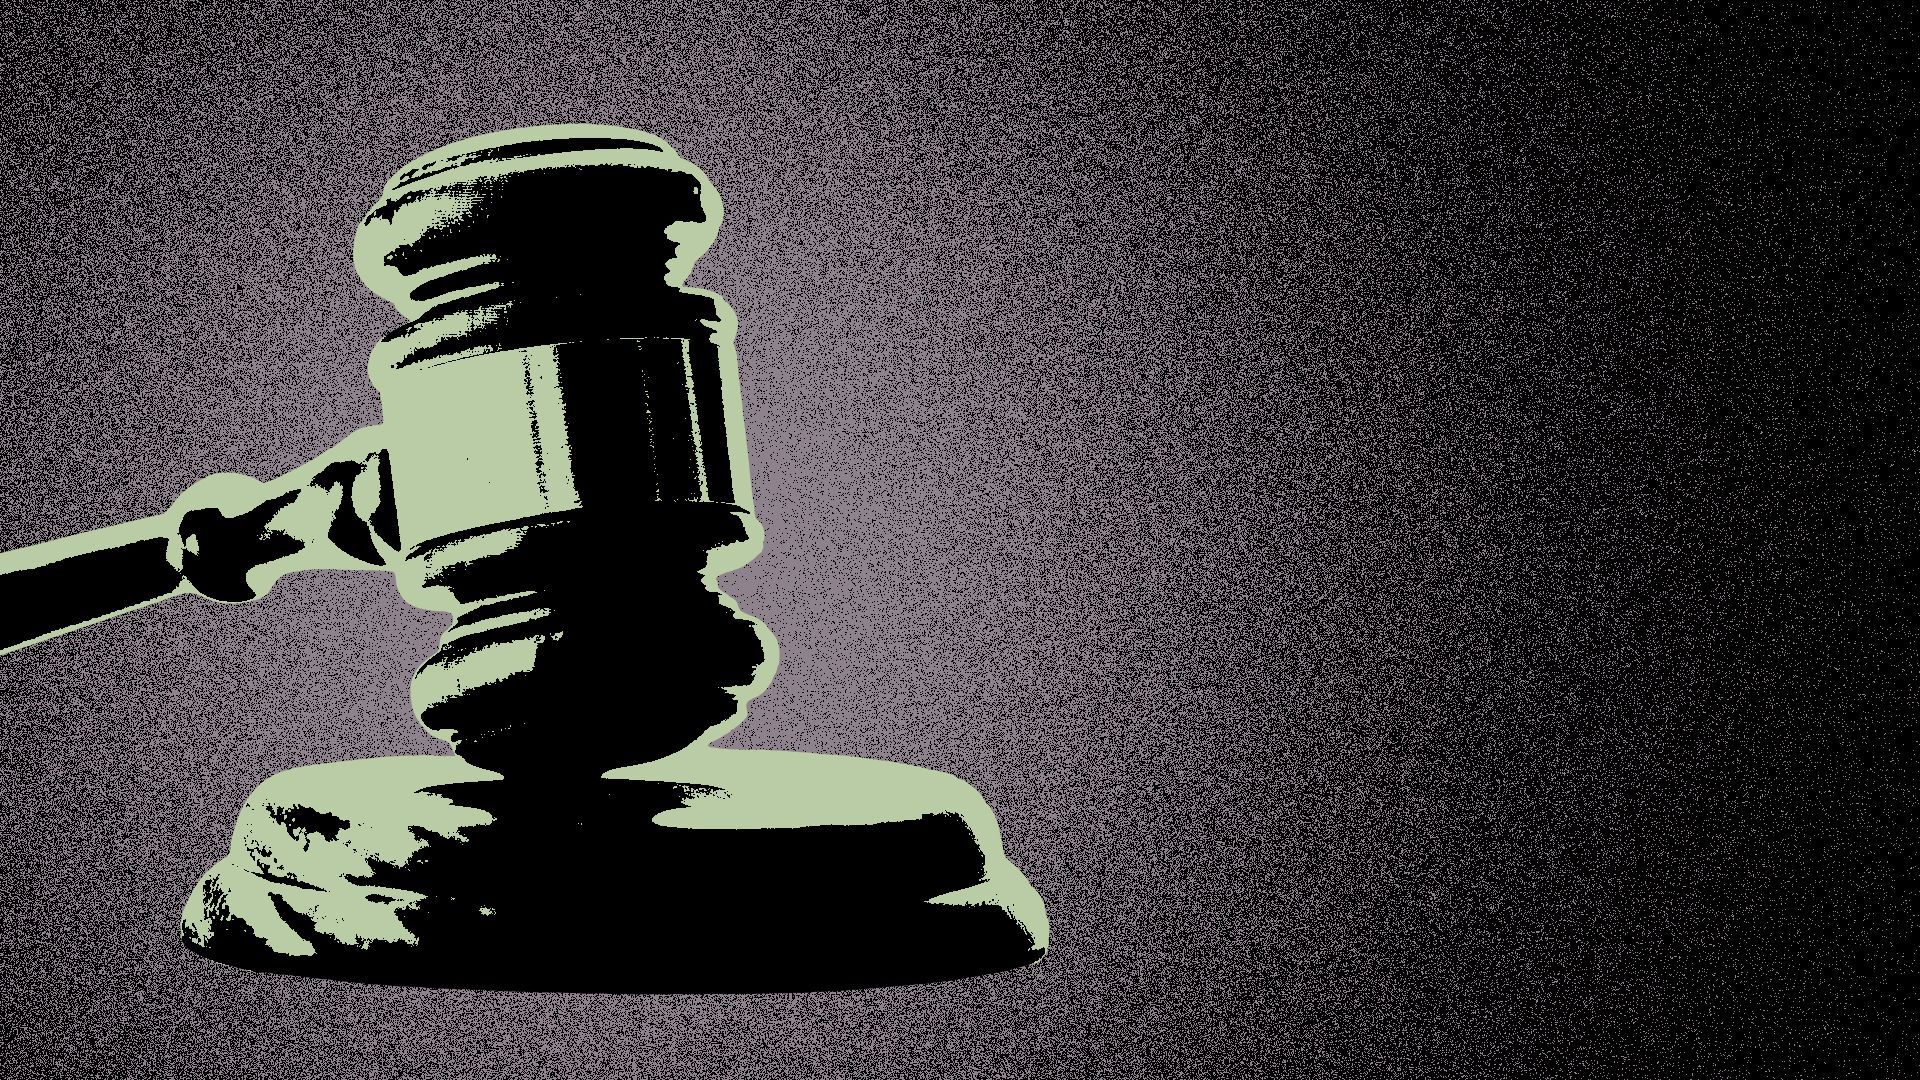 Illustration of a black and white gavel with a green tint over a purple and black background.